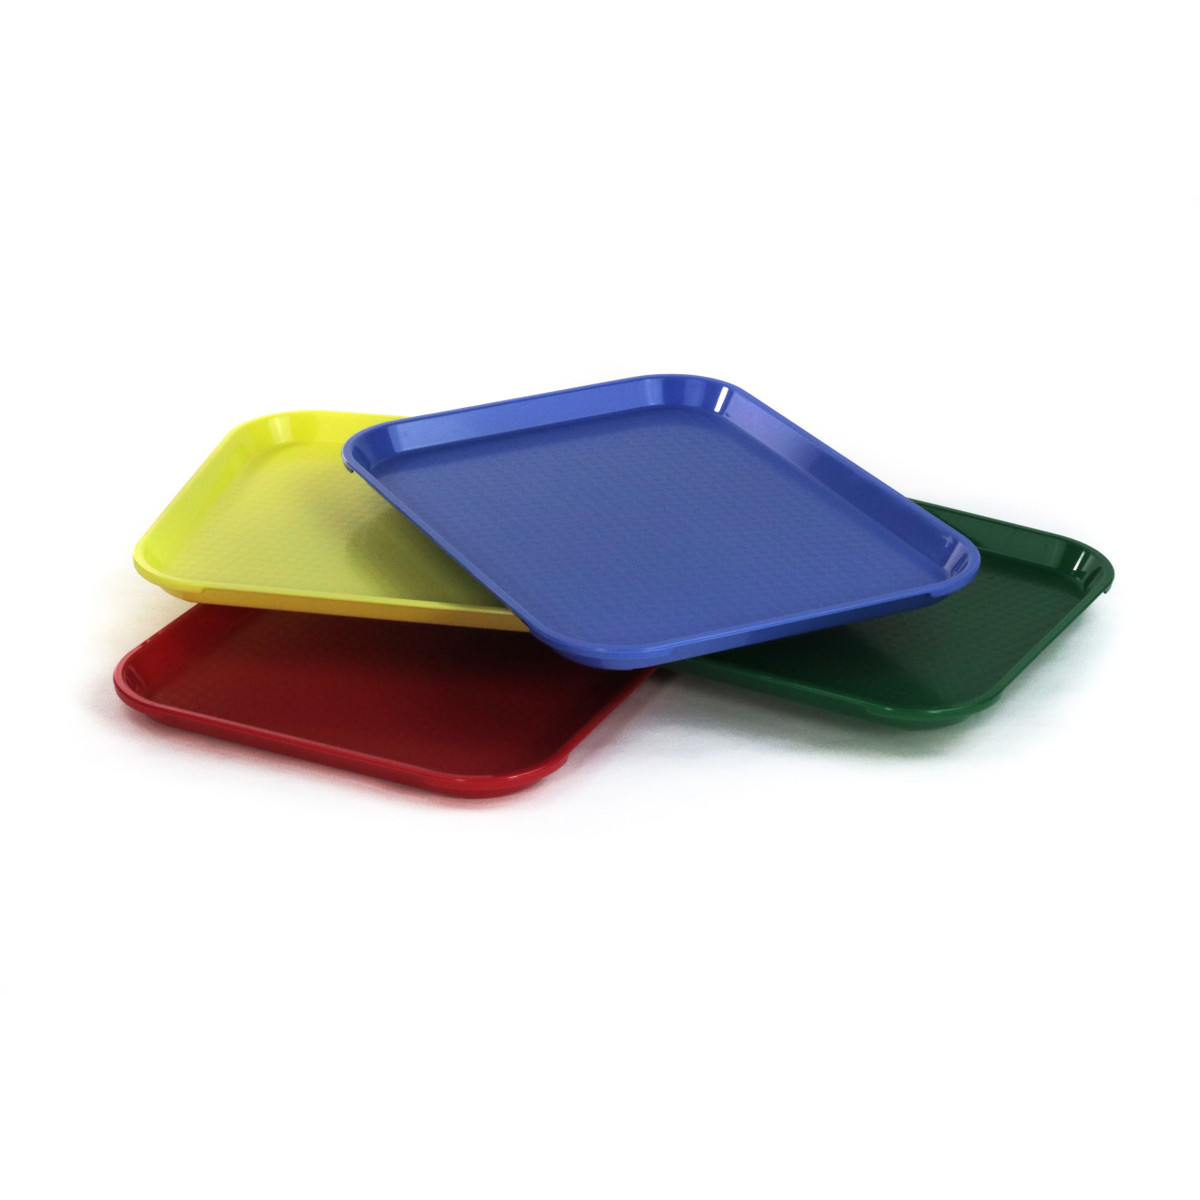 Medium-Size Plastic Tray - For Small Hands